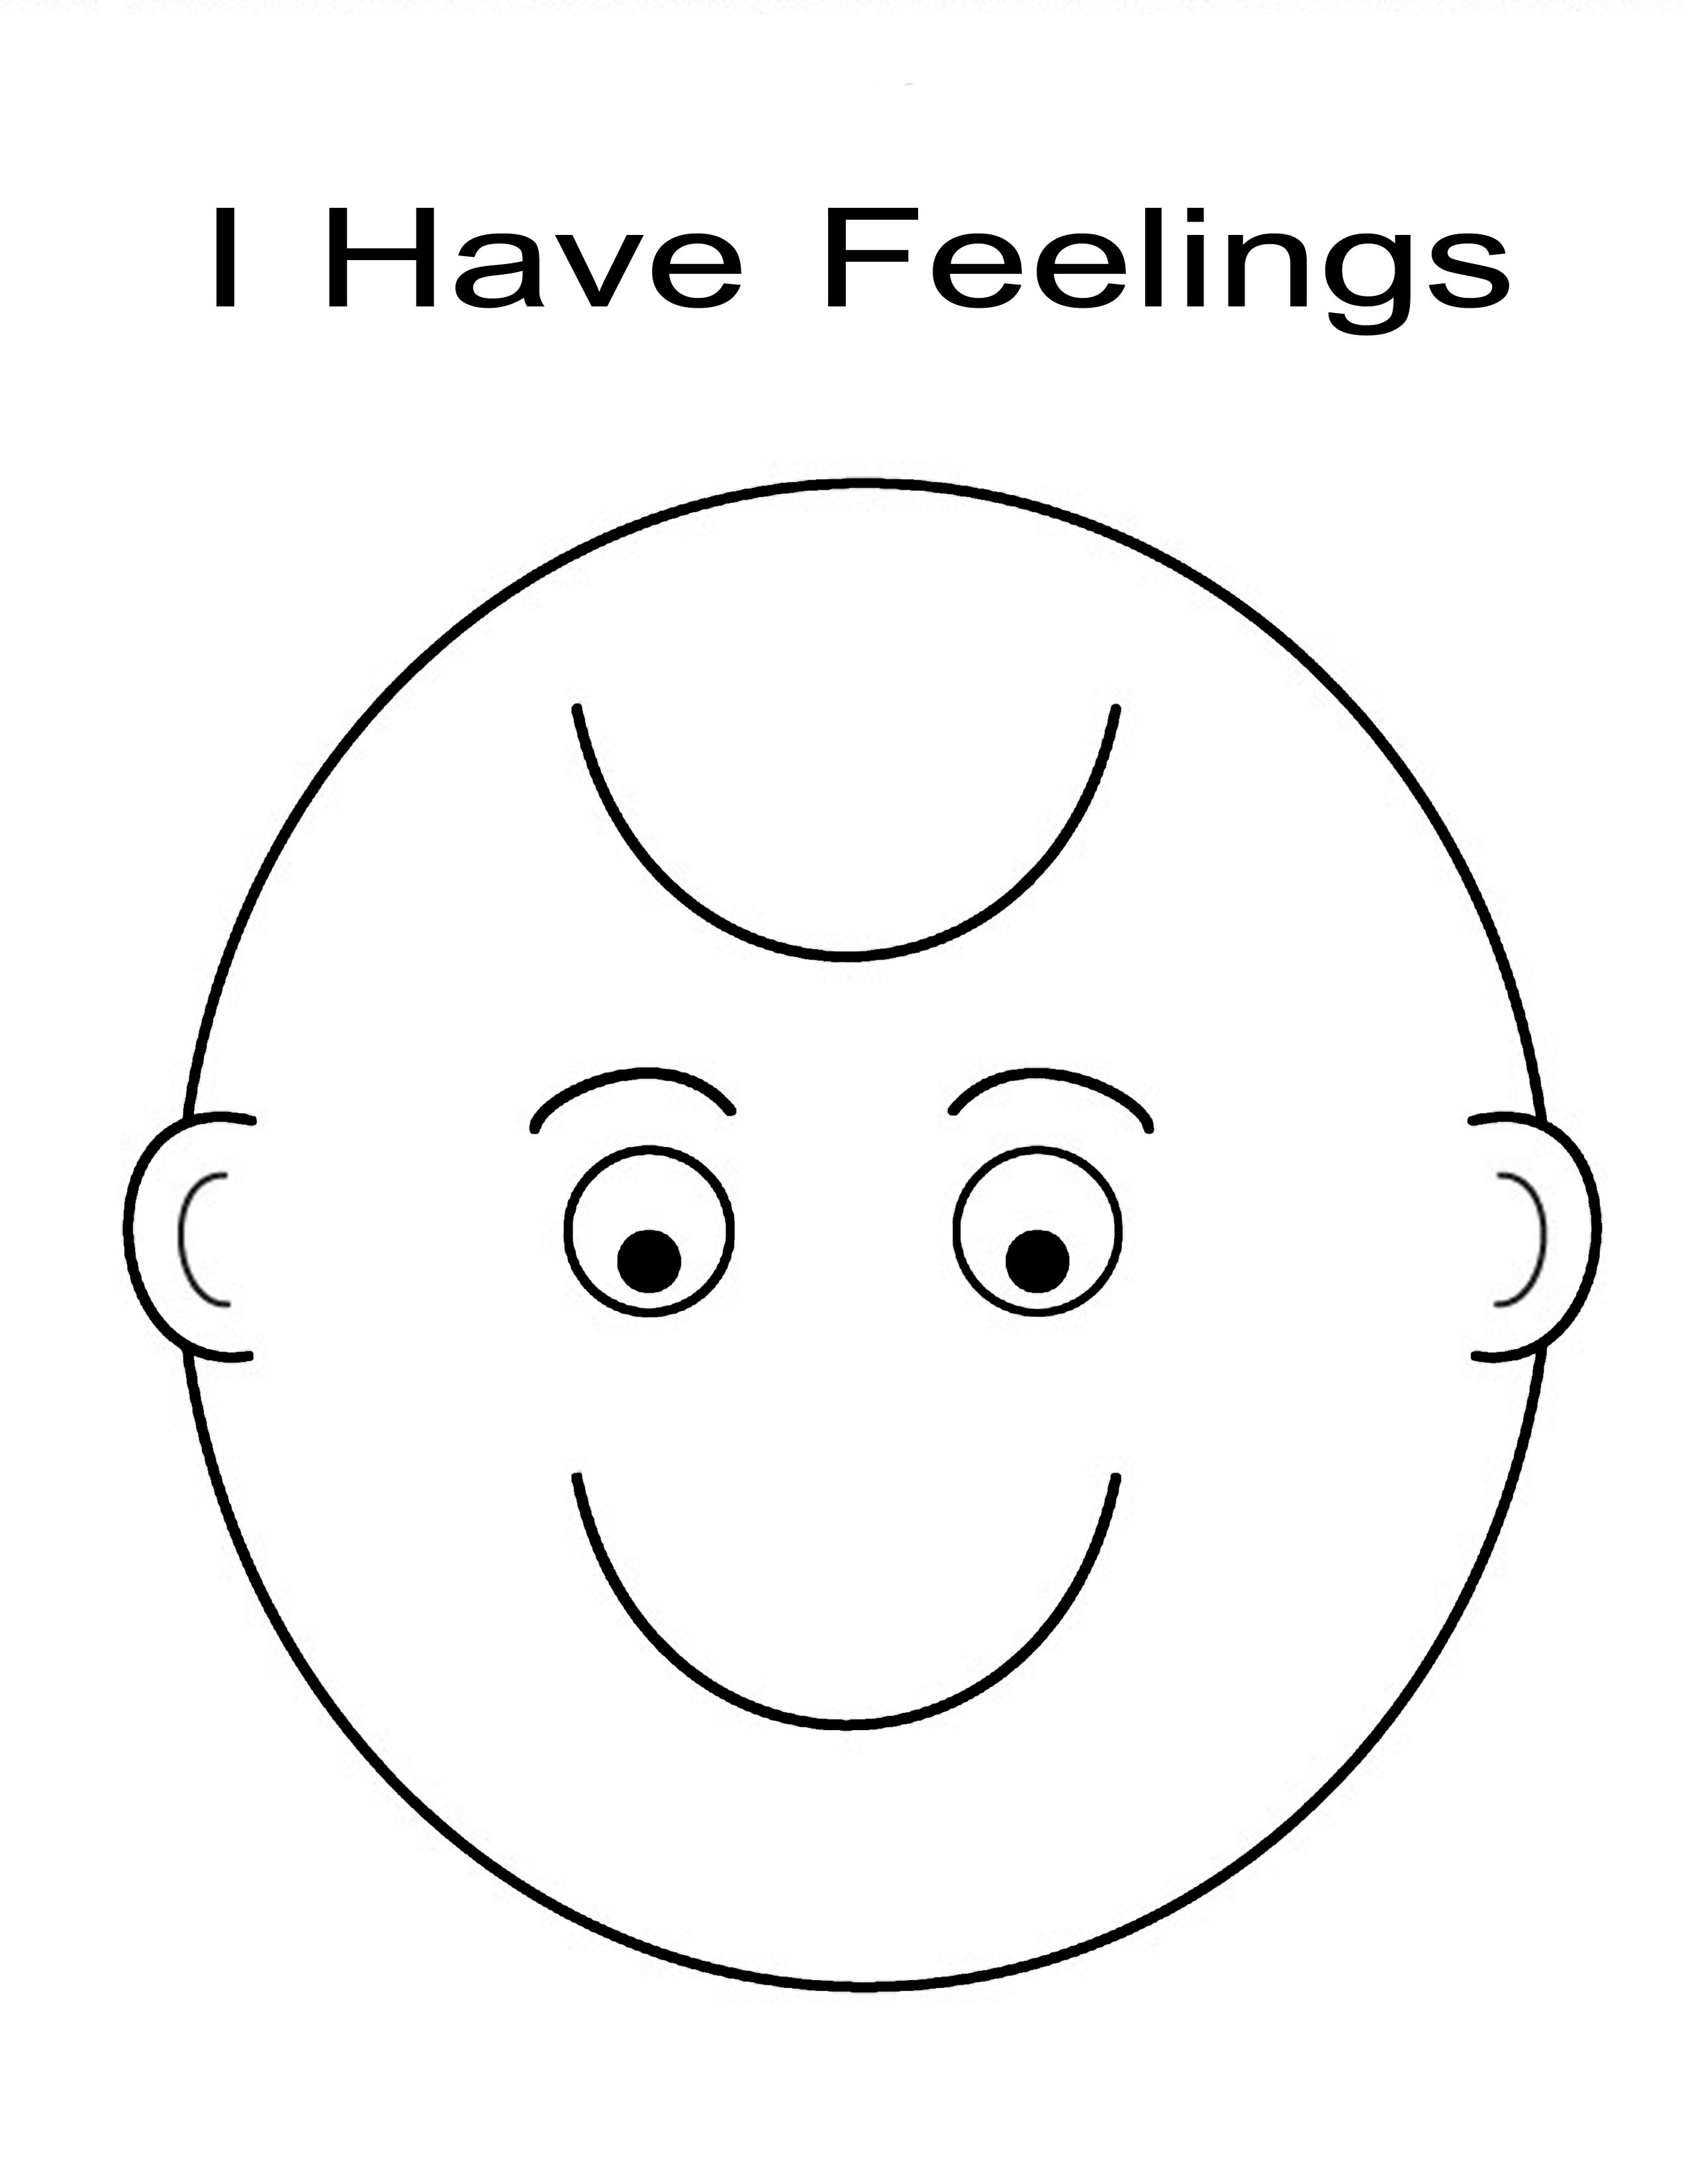 Emotions and Feelings Coloring Pages